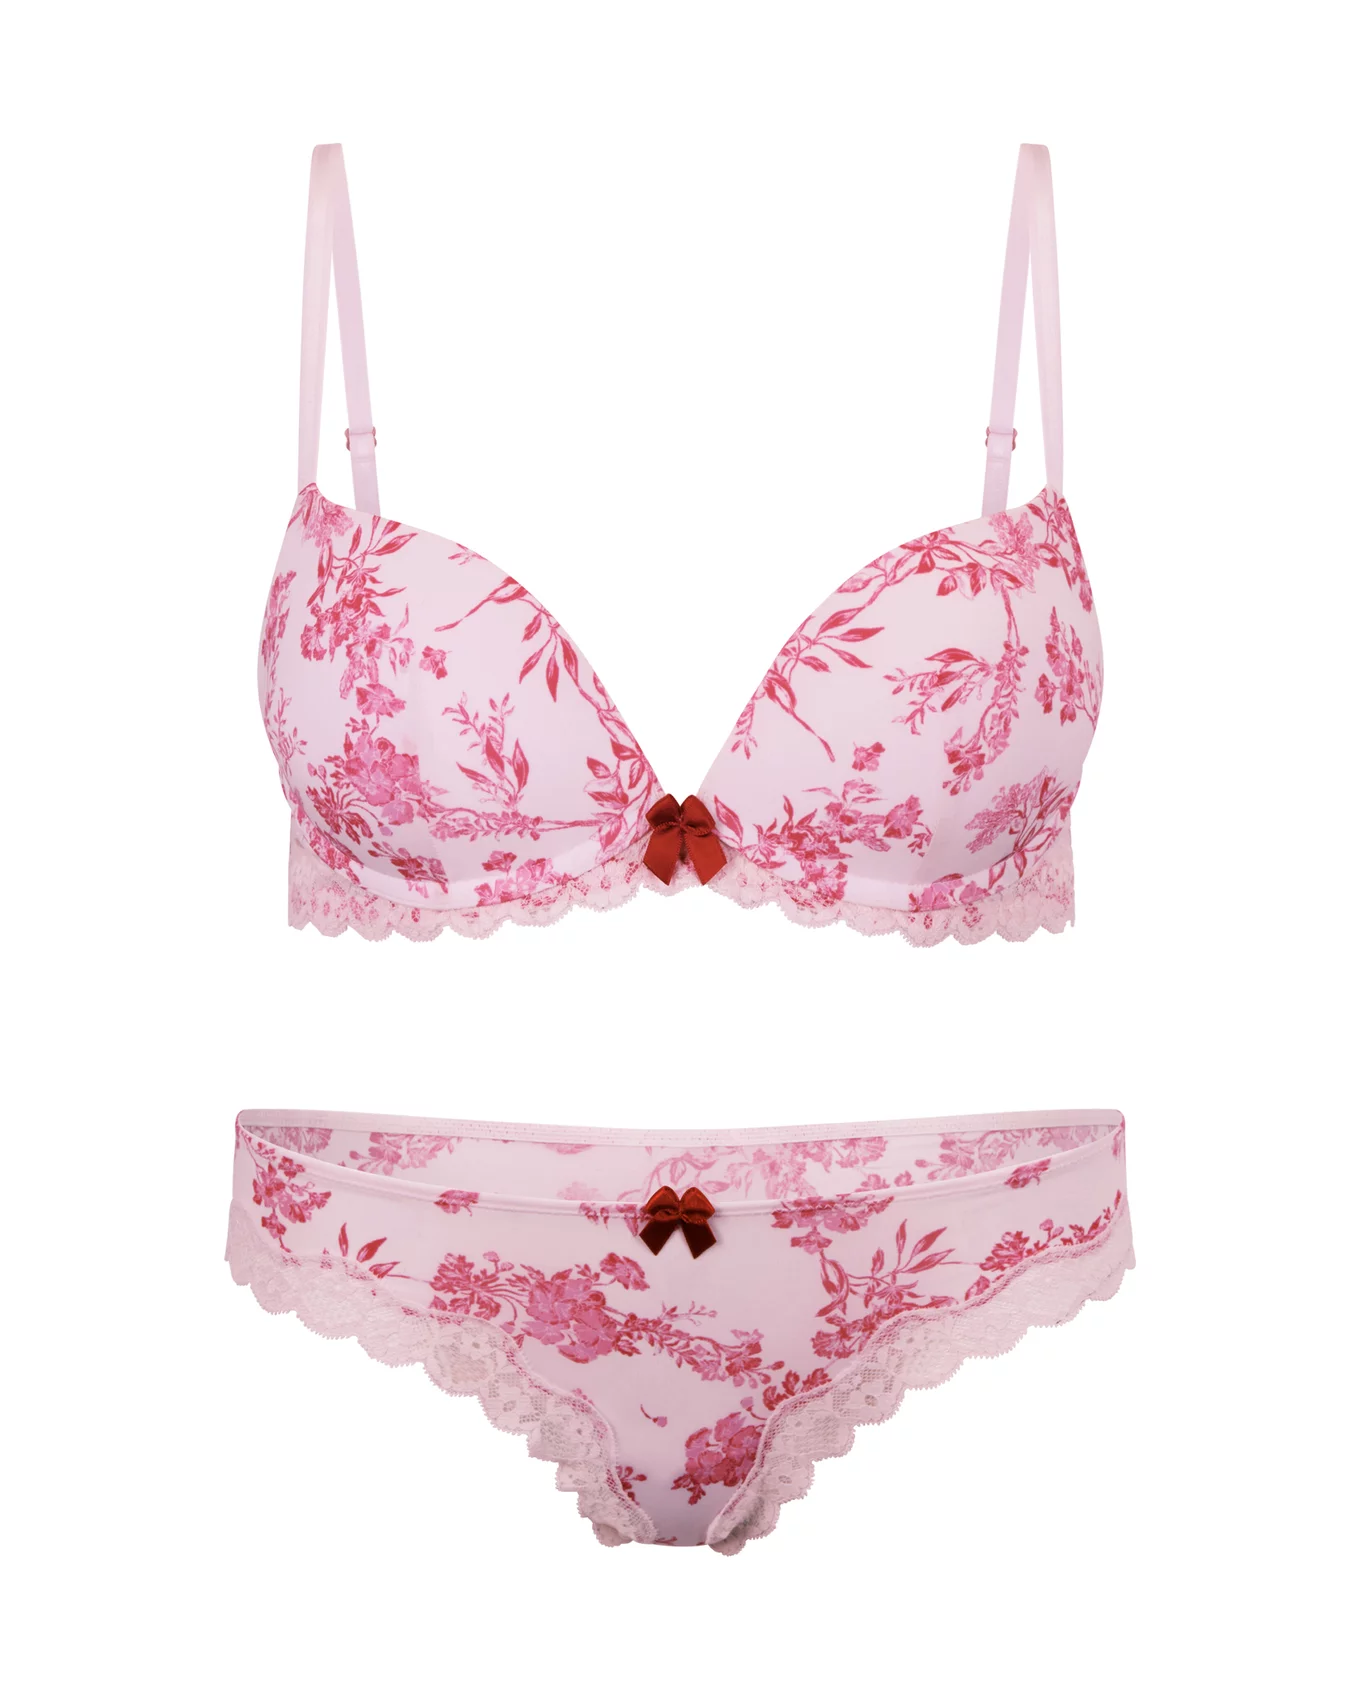 Shea Floral Pink 2 Wireless Push Up, 32A-38D